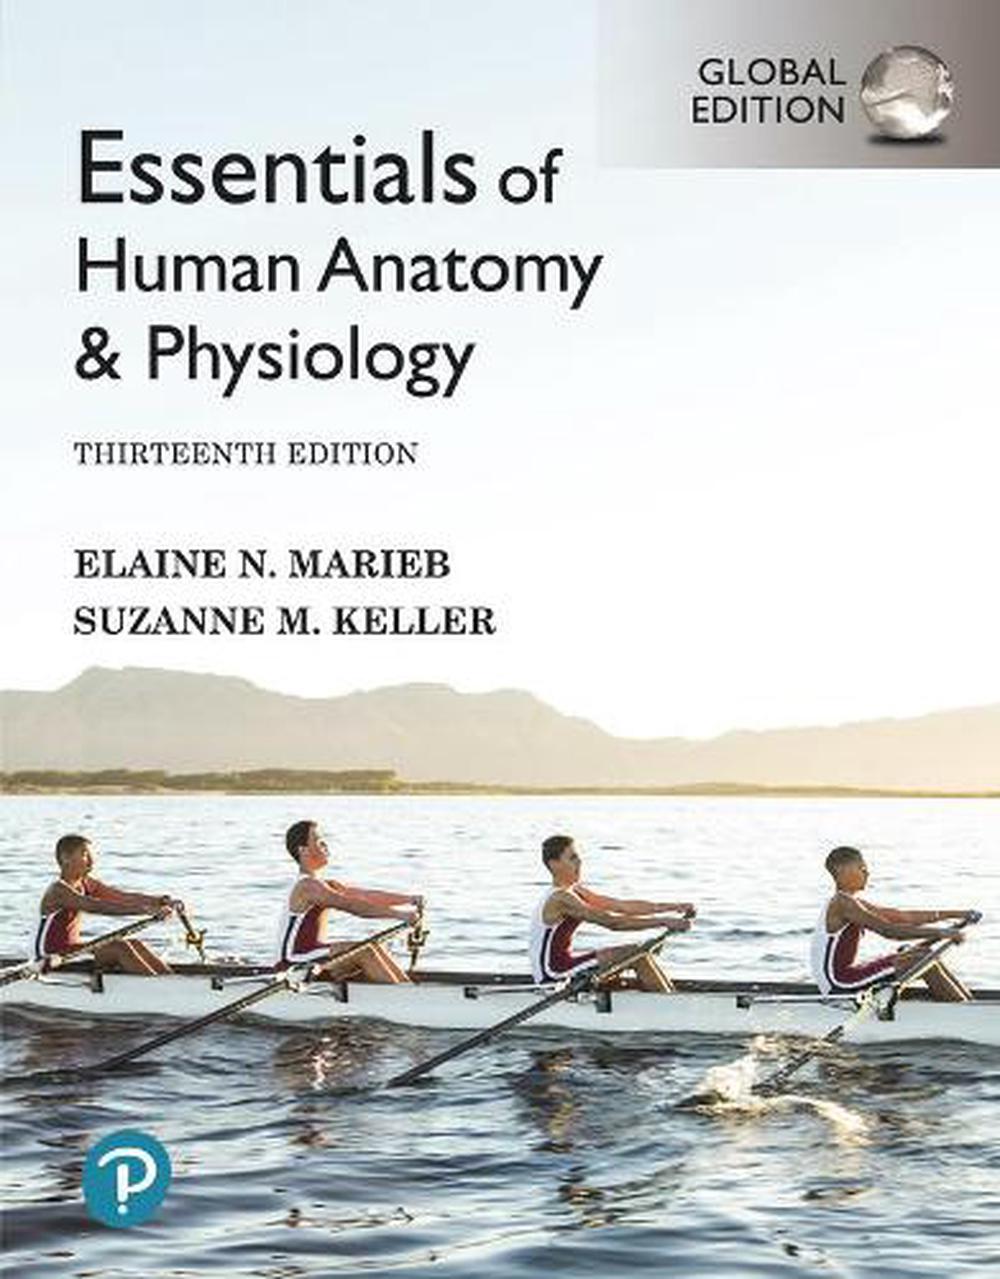 Global　Physiology,　Buy　online　Paperback,　Edition,　Elaine　13th　of　Essentials　Marieb,　9781292401942　at　The　Human　Anatomy　by　Edition　Nile